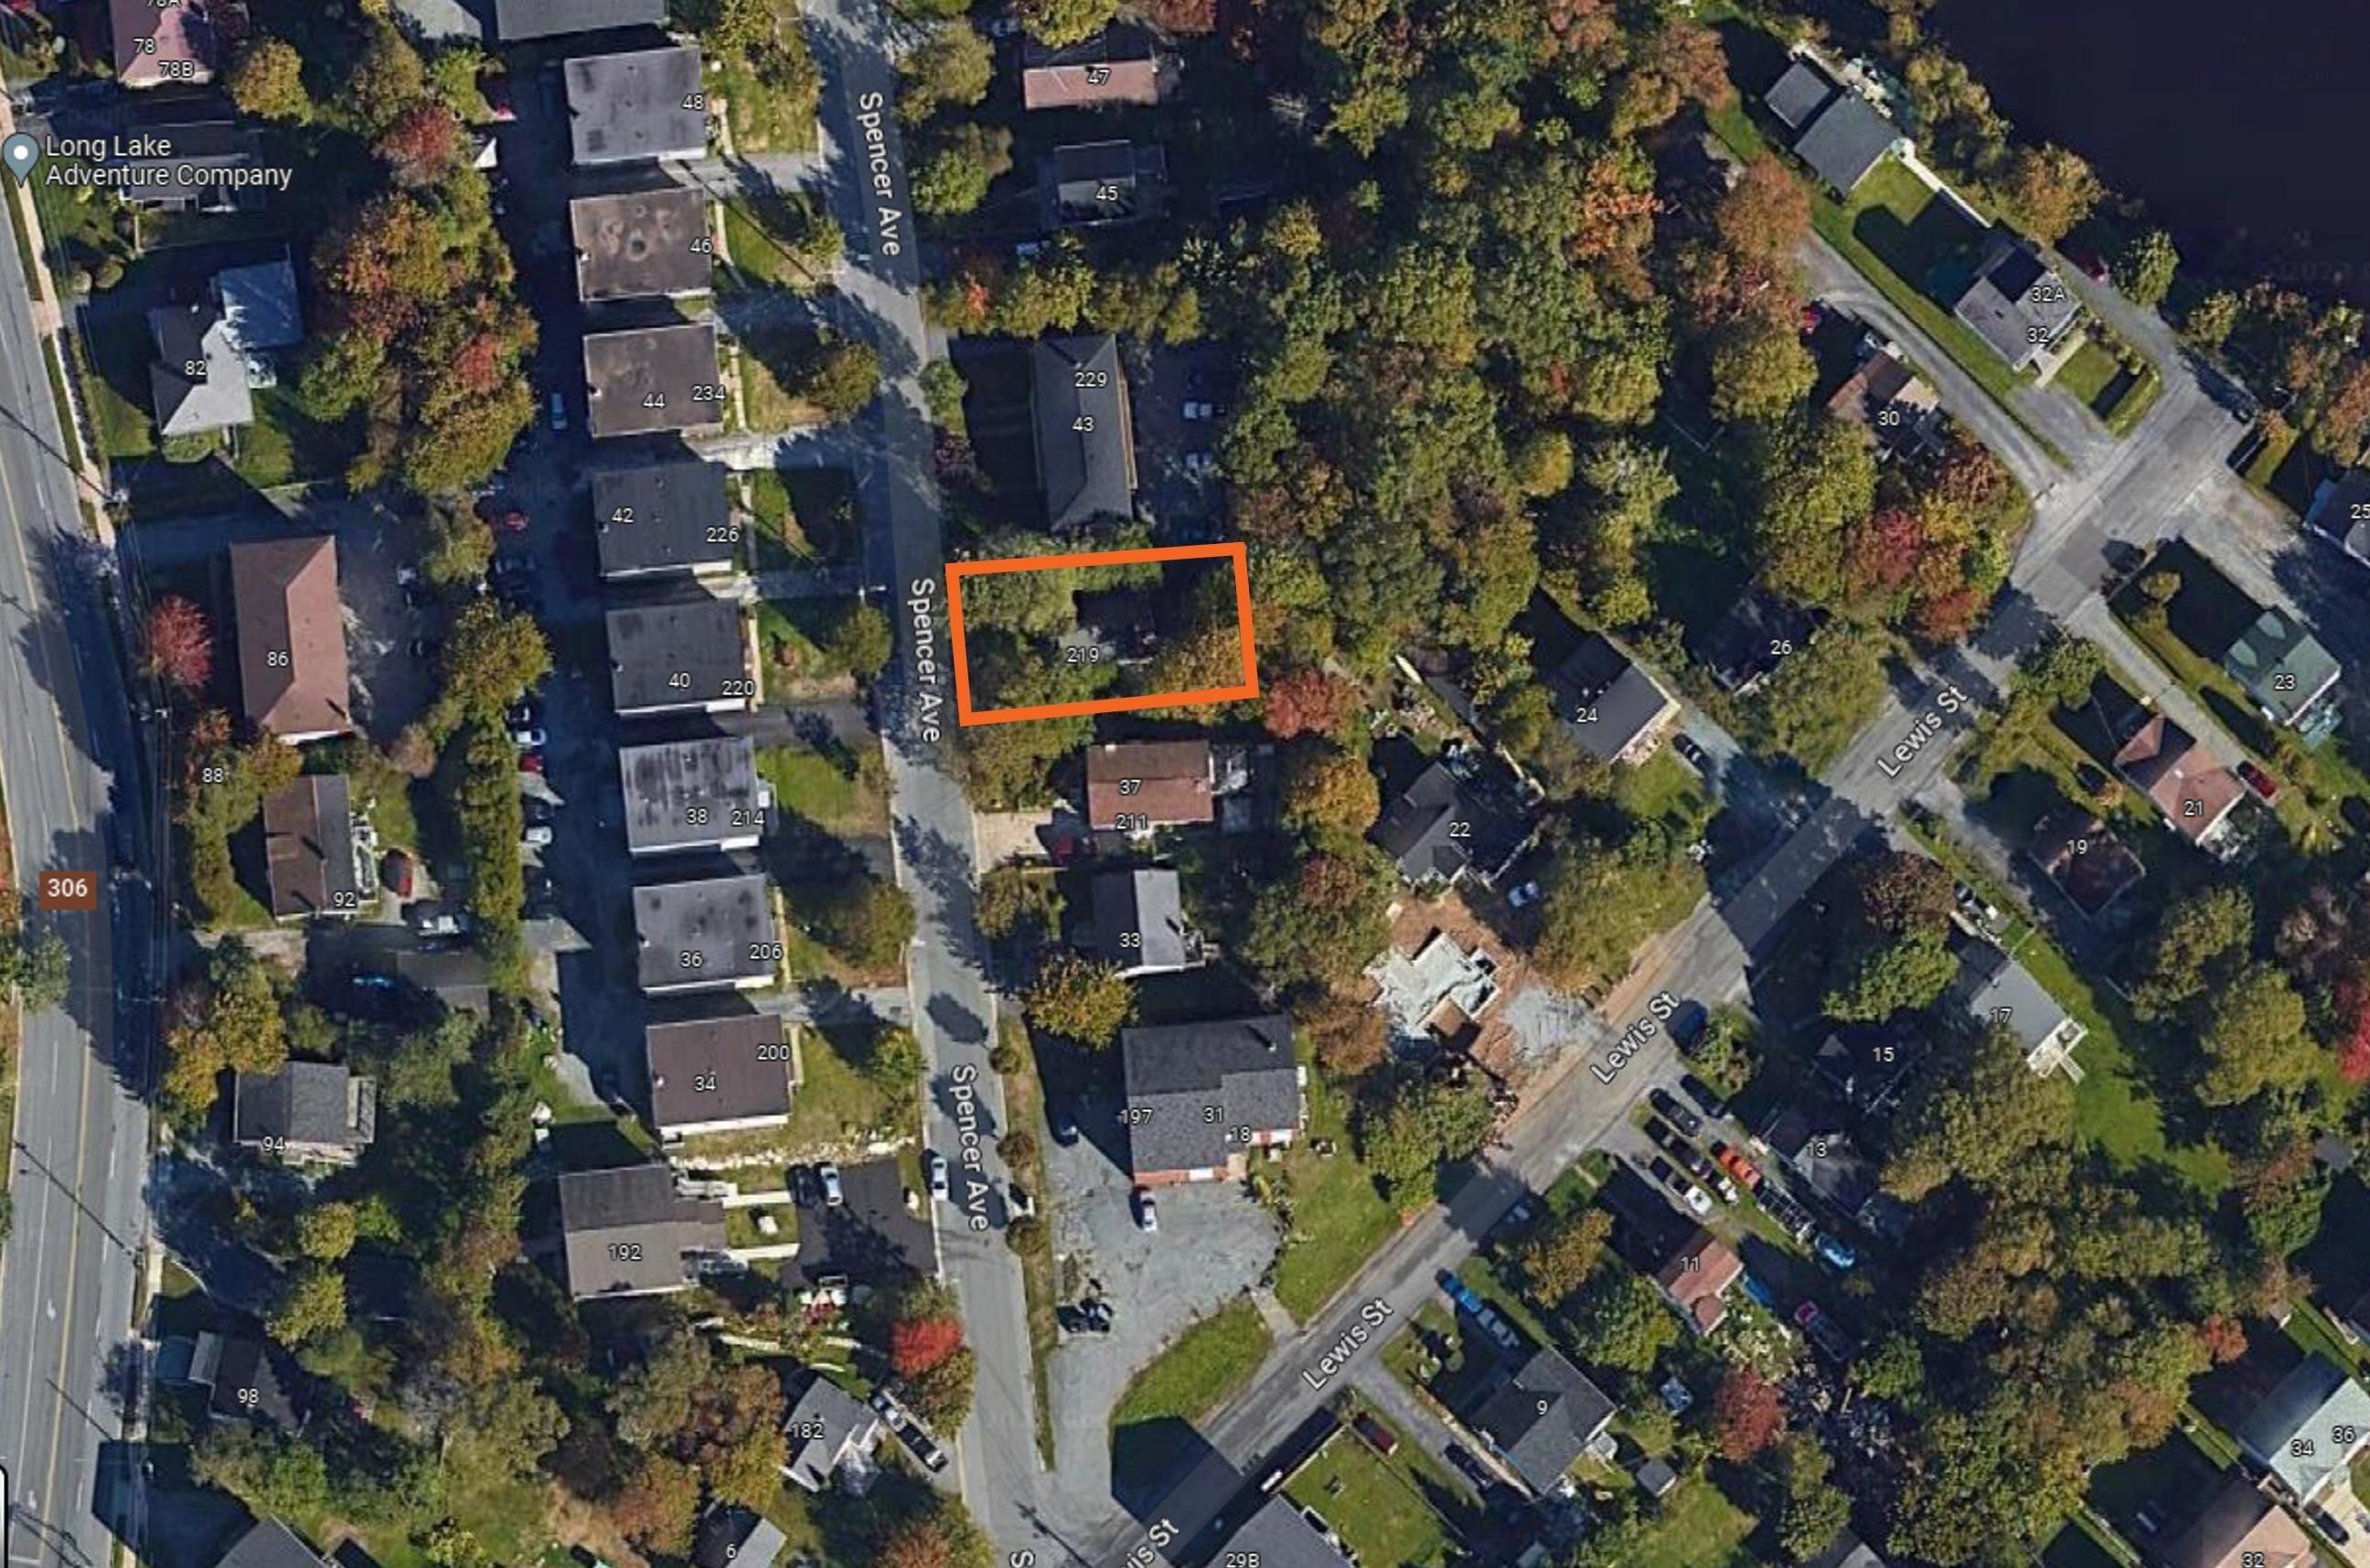 Main Photo: 219 Spencer Avenue in Spryfield: 7-Spryfield Vacant Land for sale (Halifax-Dartmouth)  : MLS®# 202319762